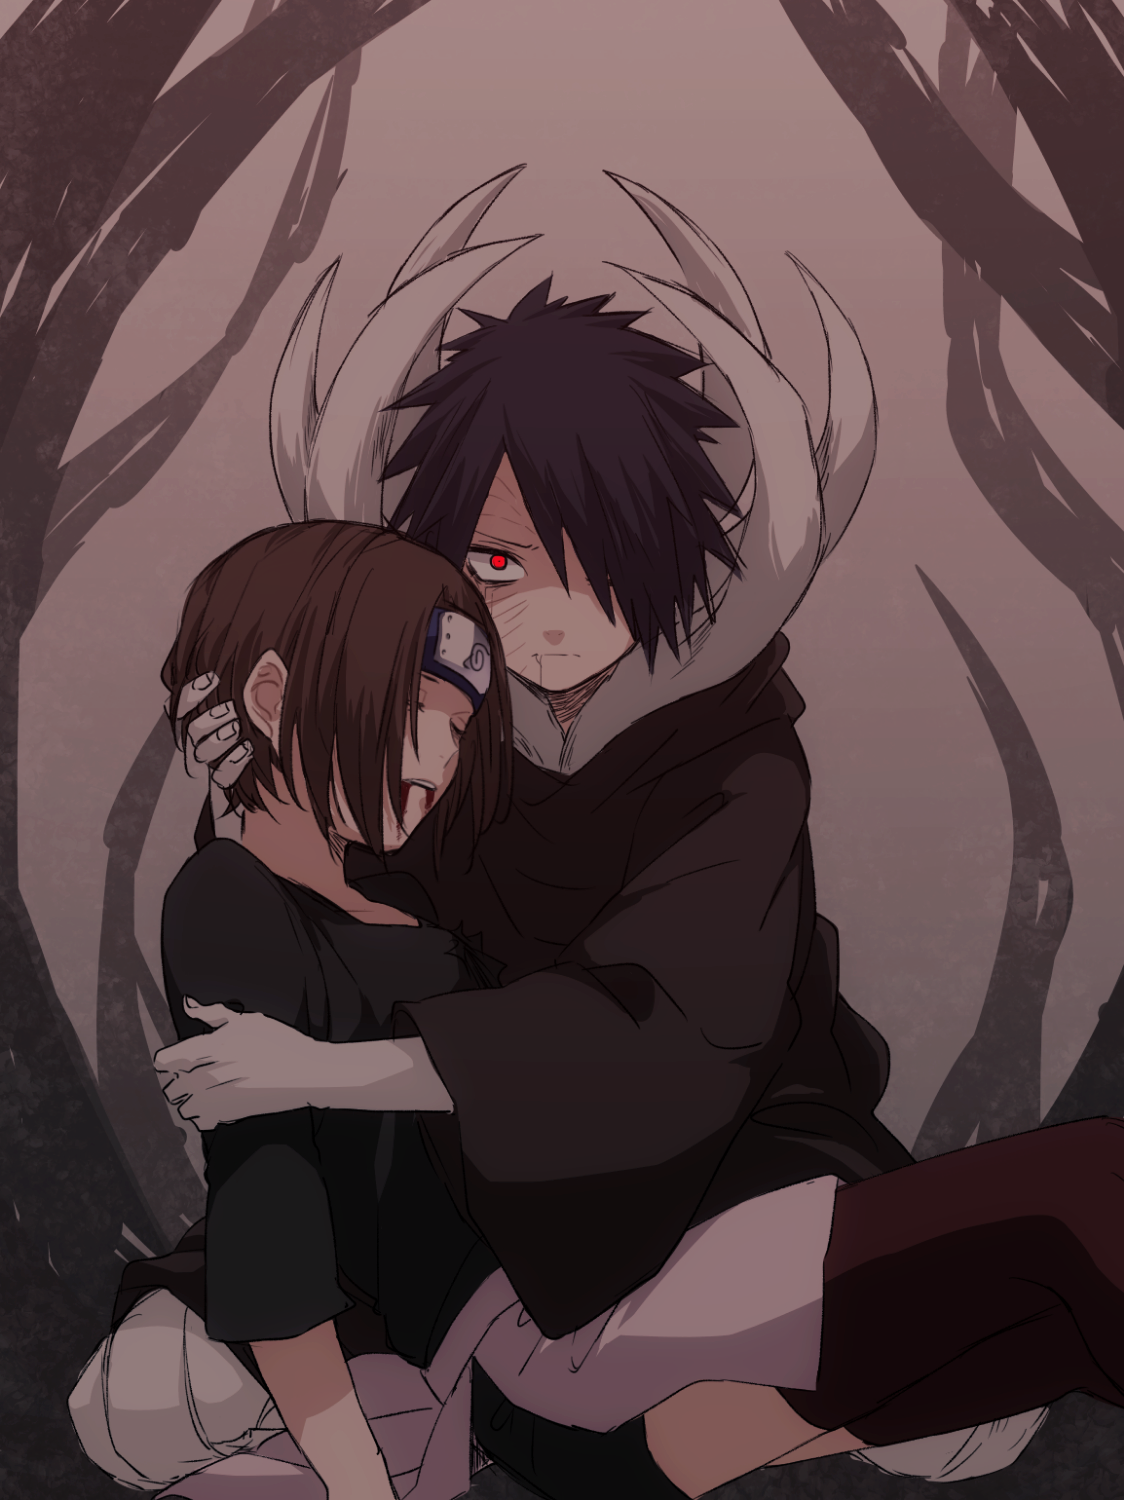 Obito X Rin Wallpapers - Wallpaper Cave.